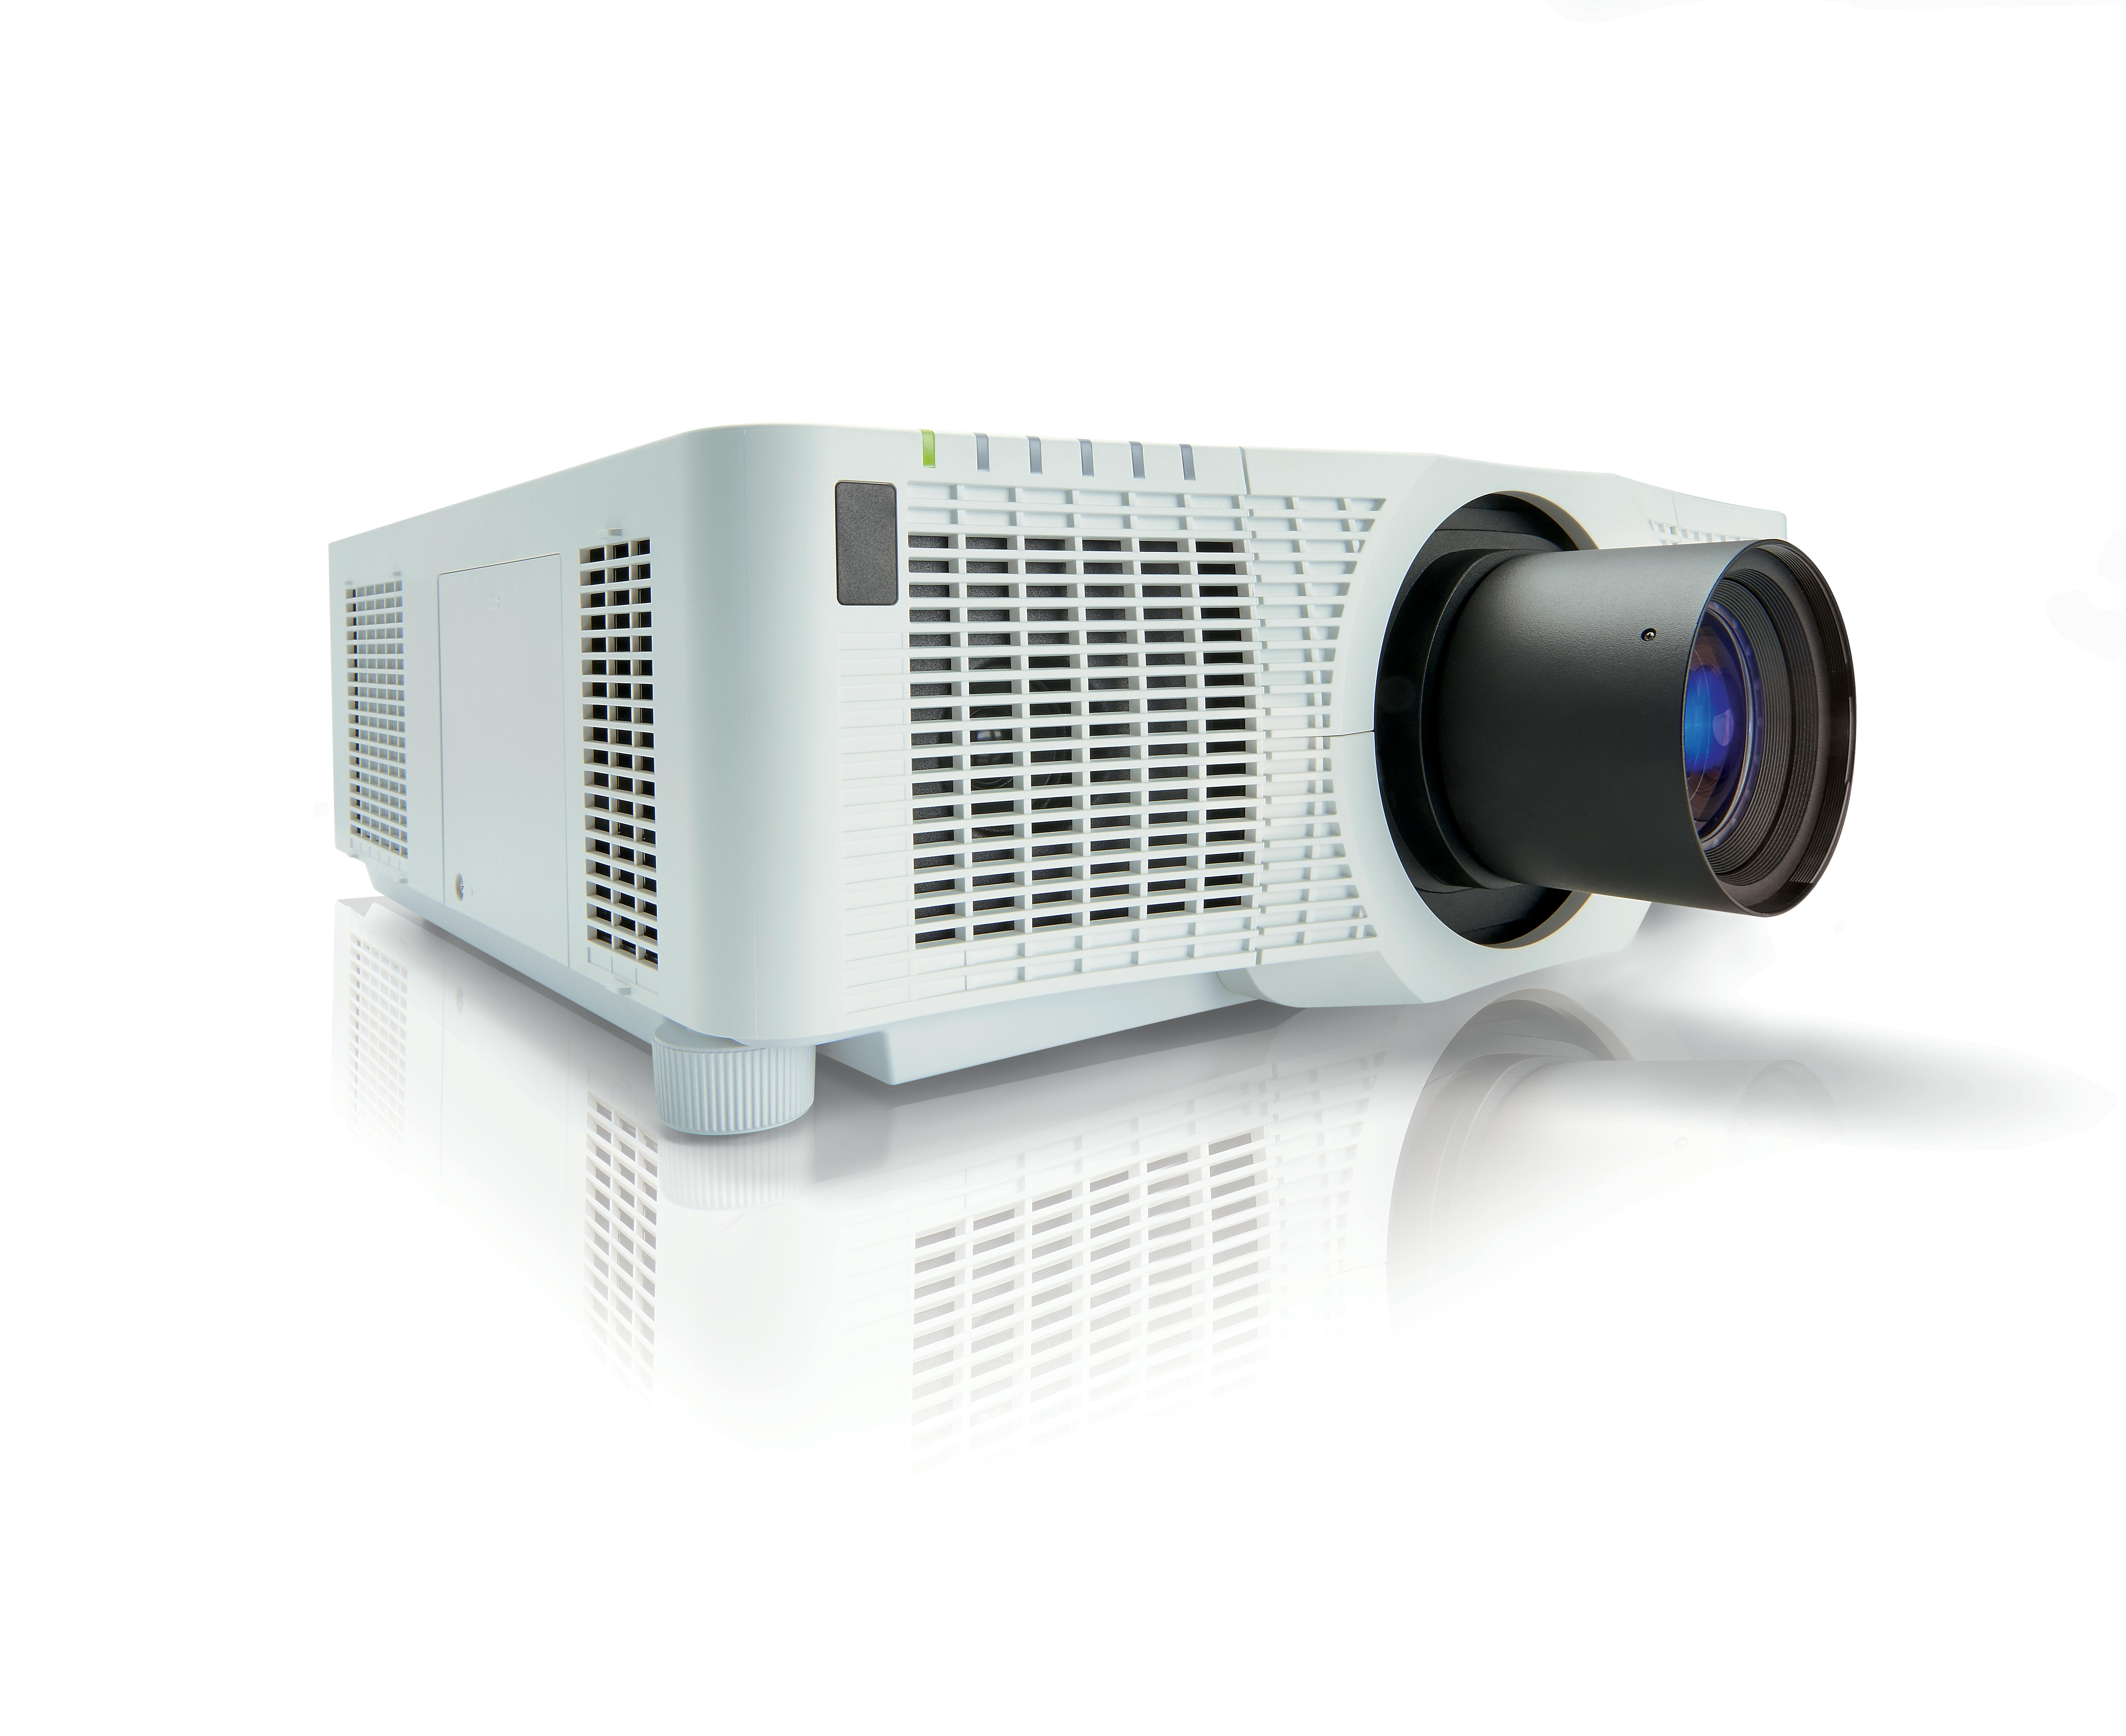 Christie LWU620i-D 3LCD projector | 121-048103-XX